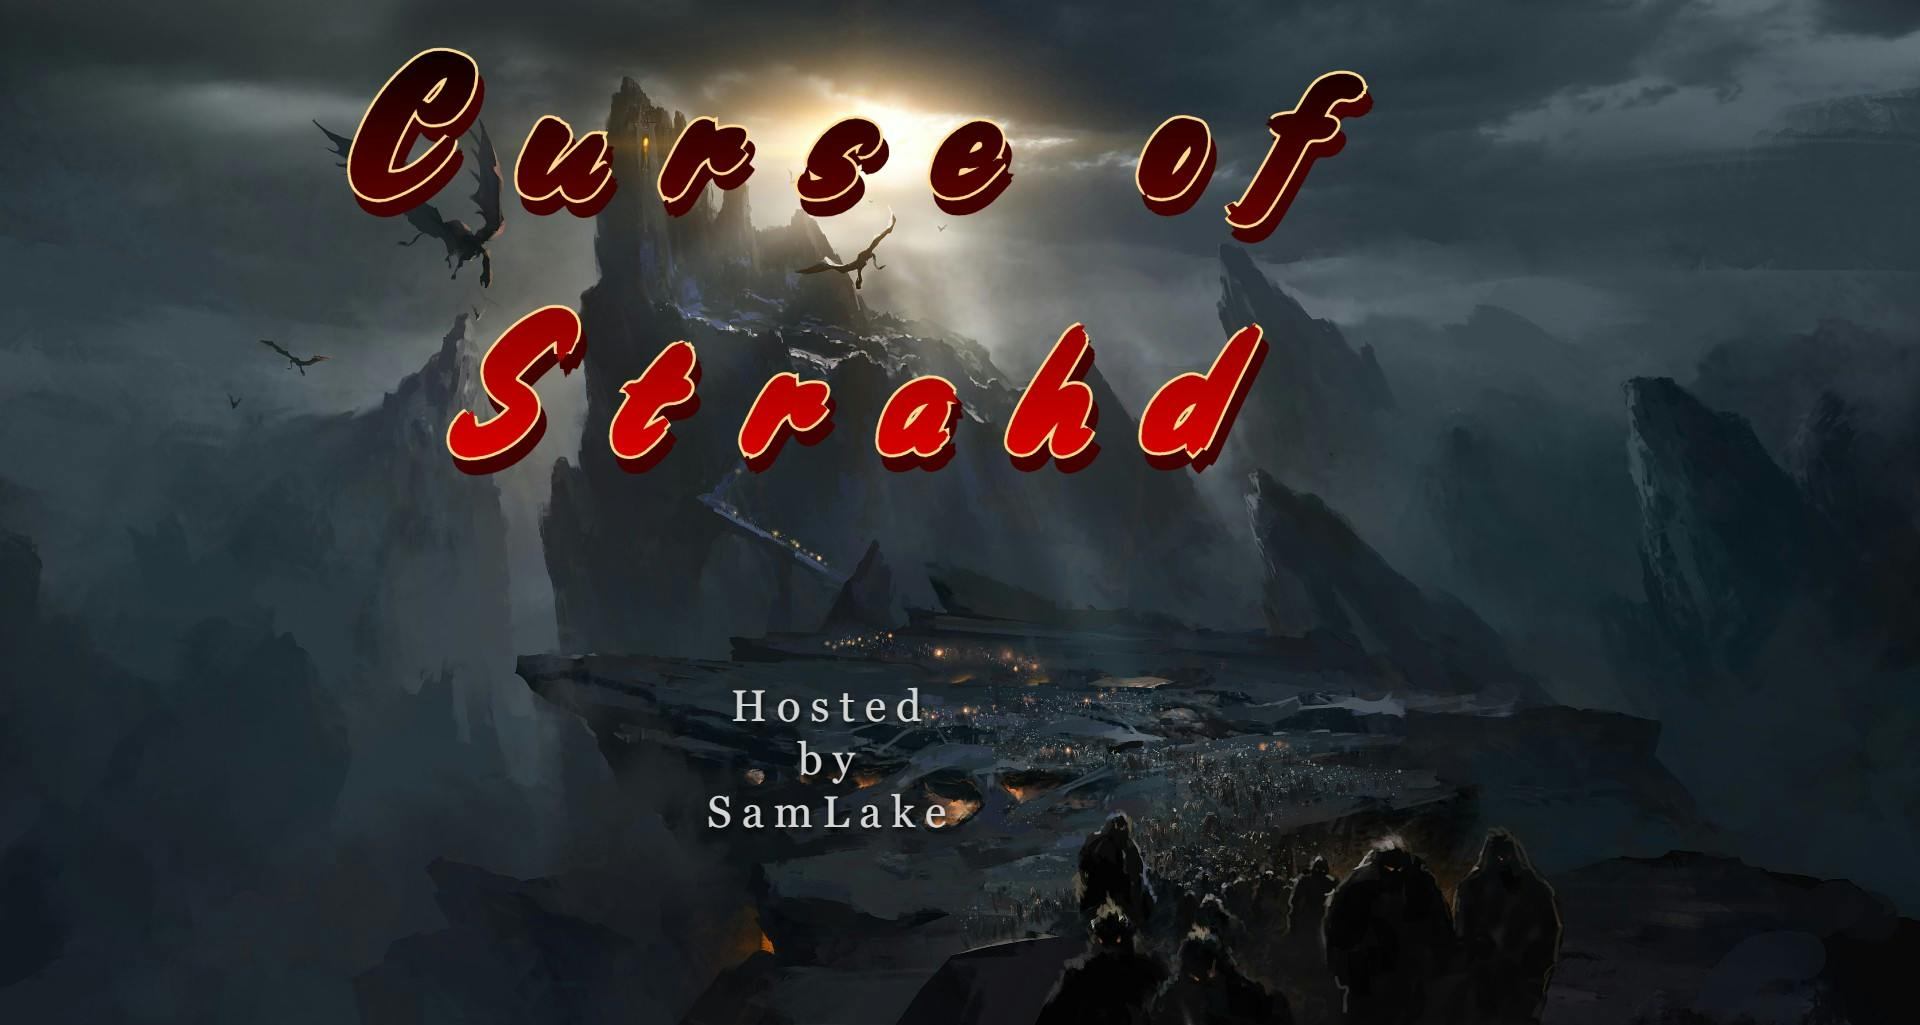 Play Dungeons & Dragons 5e Online, Curse of Strahd — She Is the Ancient, Mondays 7 pm EST